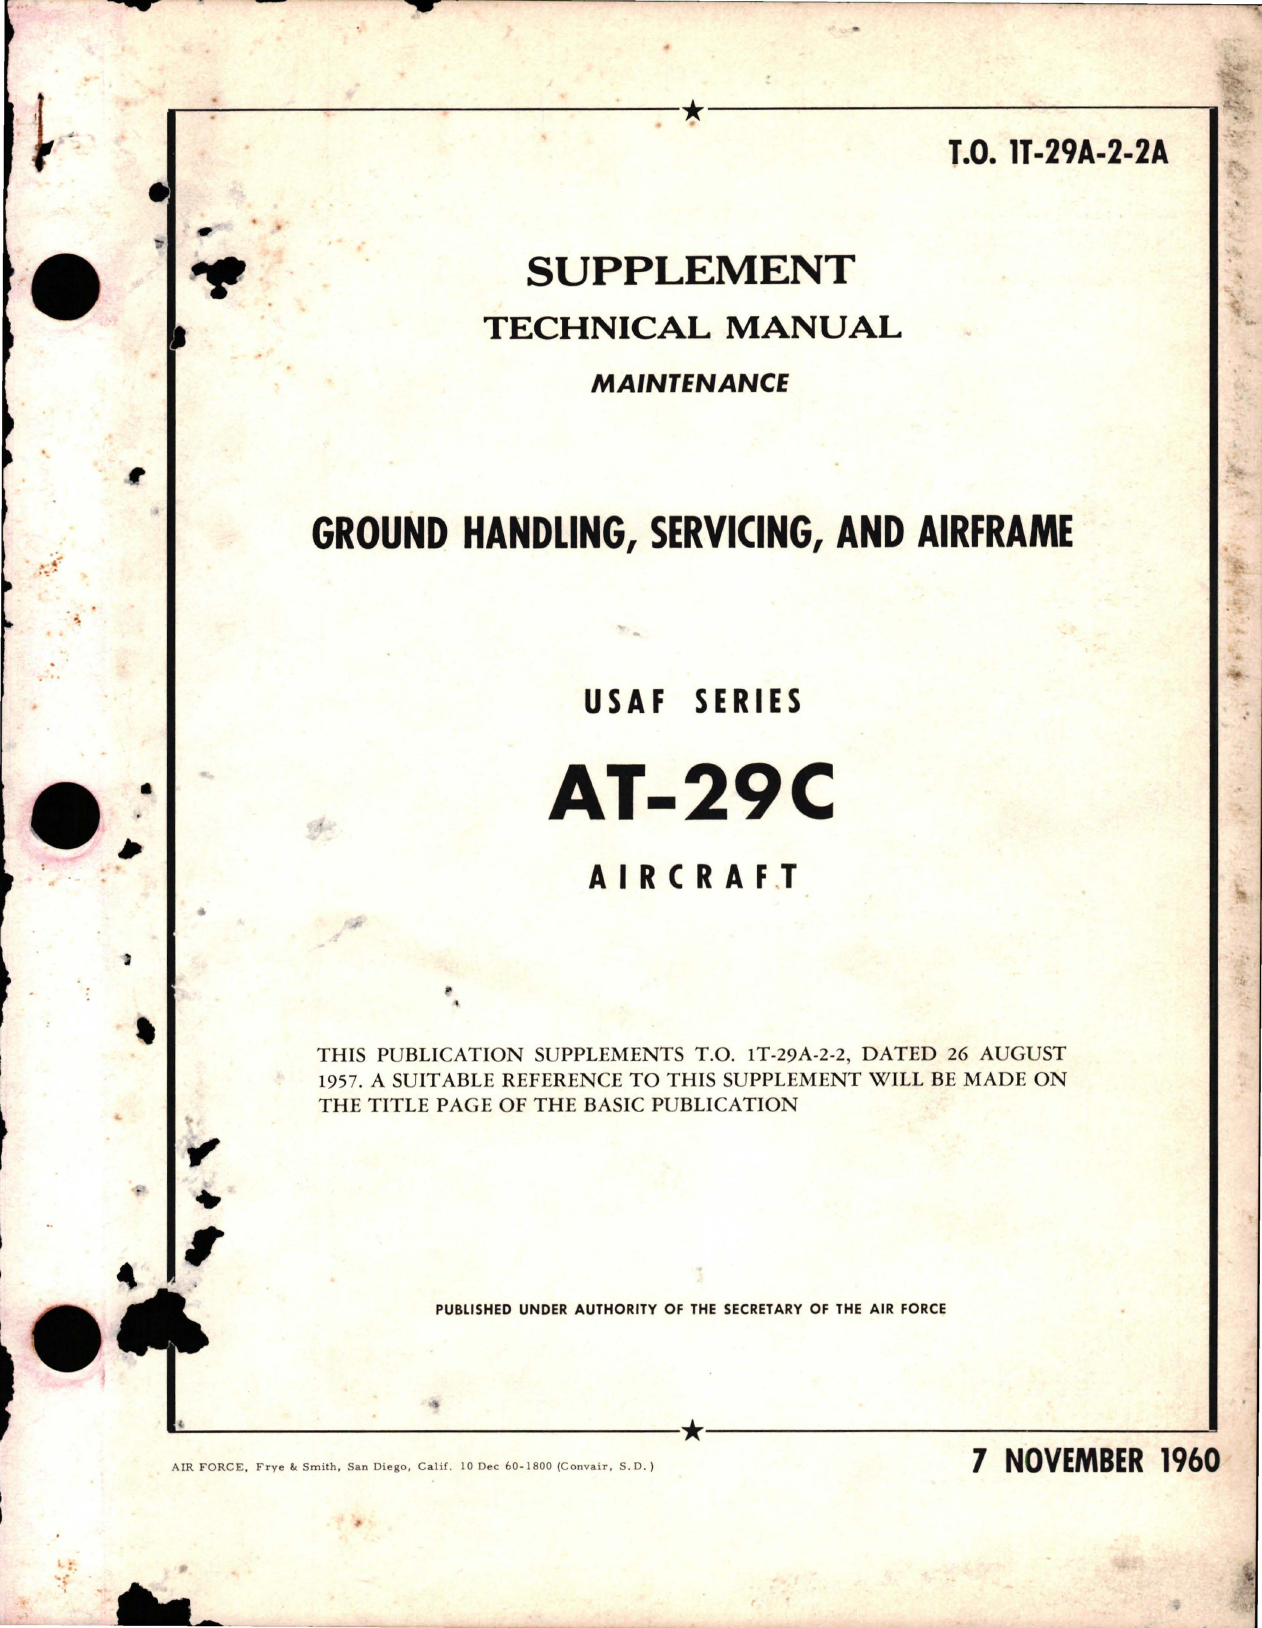 Sample page 1 from AirCorps Library document: Supplement to Maintenance for Ground Handling, Servicing and Airframe for AT-29C